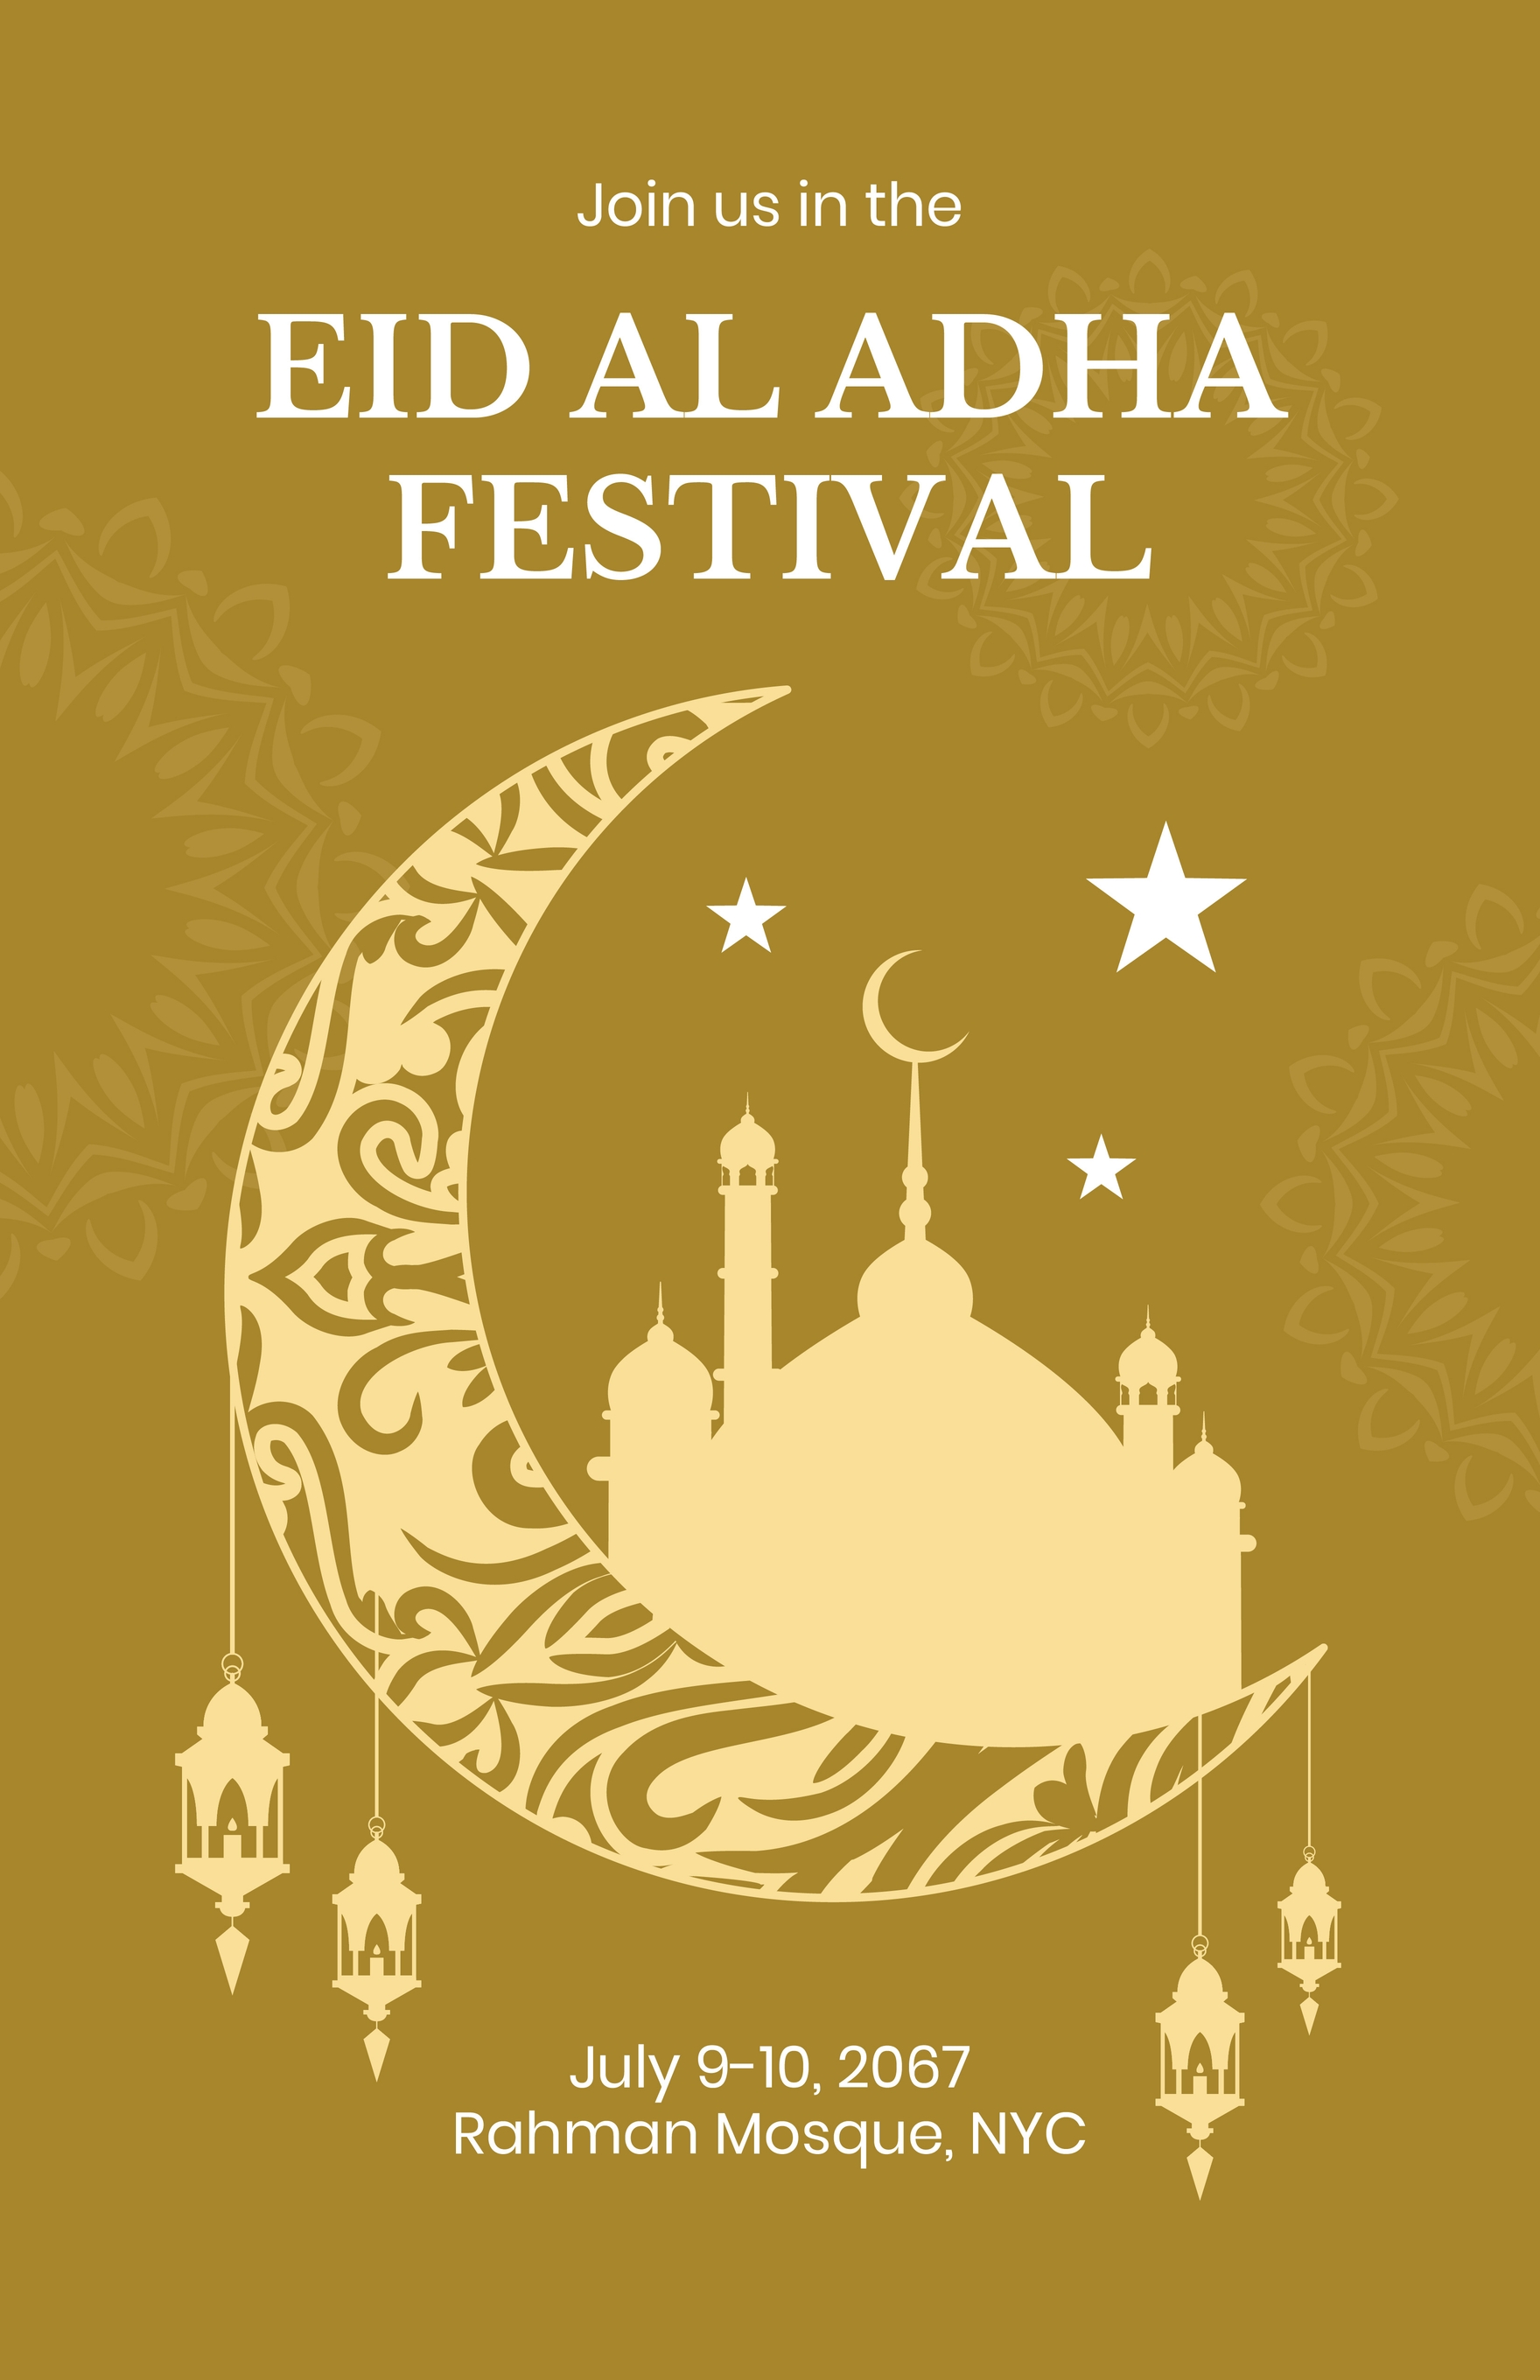 Eid Al Adha Festival Poster in Word, Google Docs, Illustrator, PSD, Apple Pages, Publisher